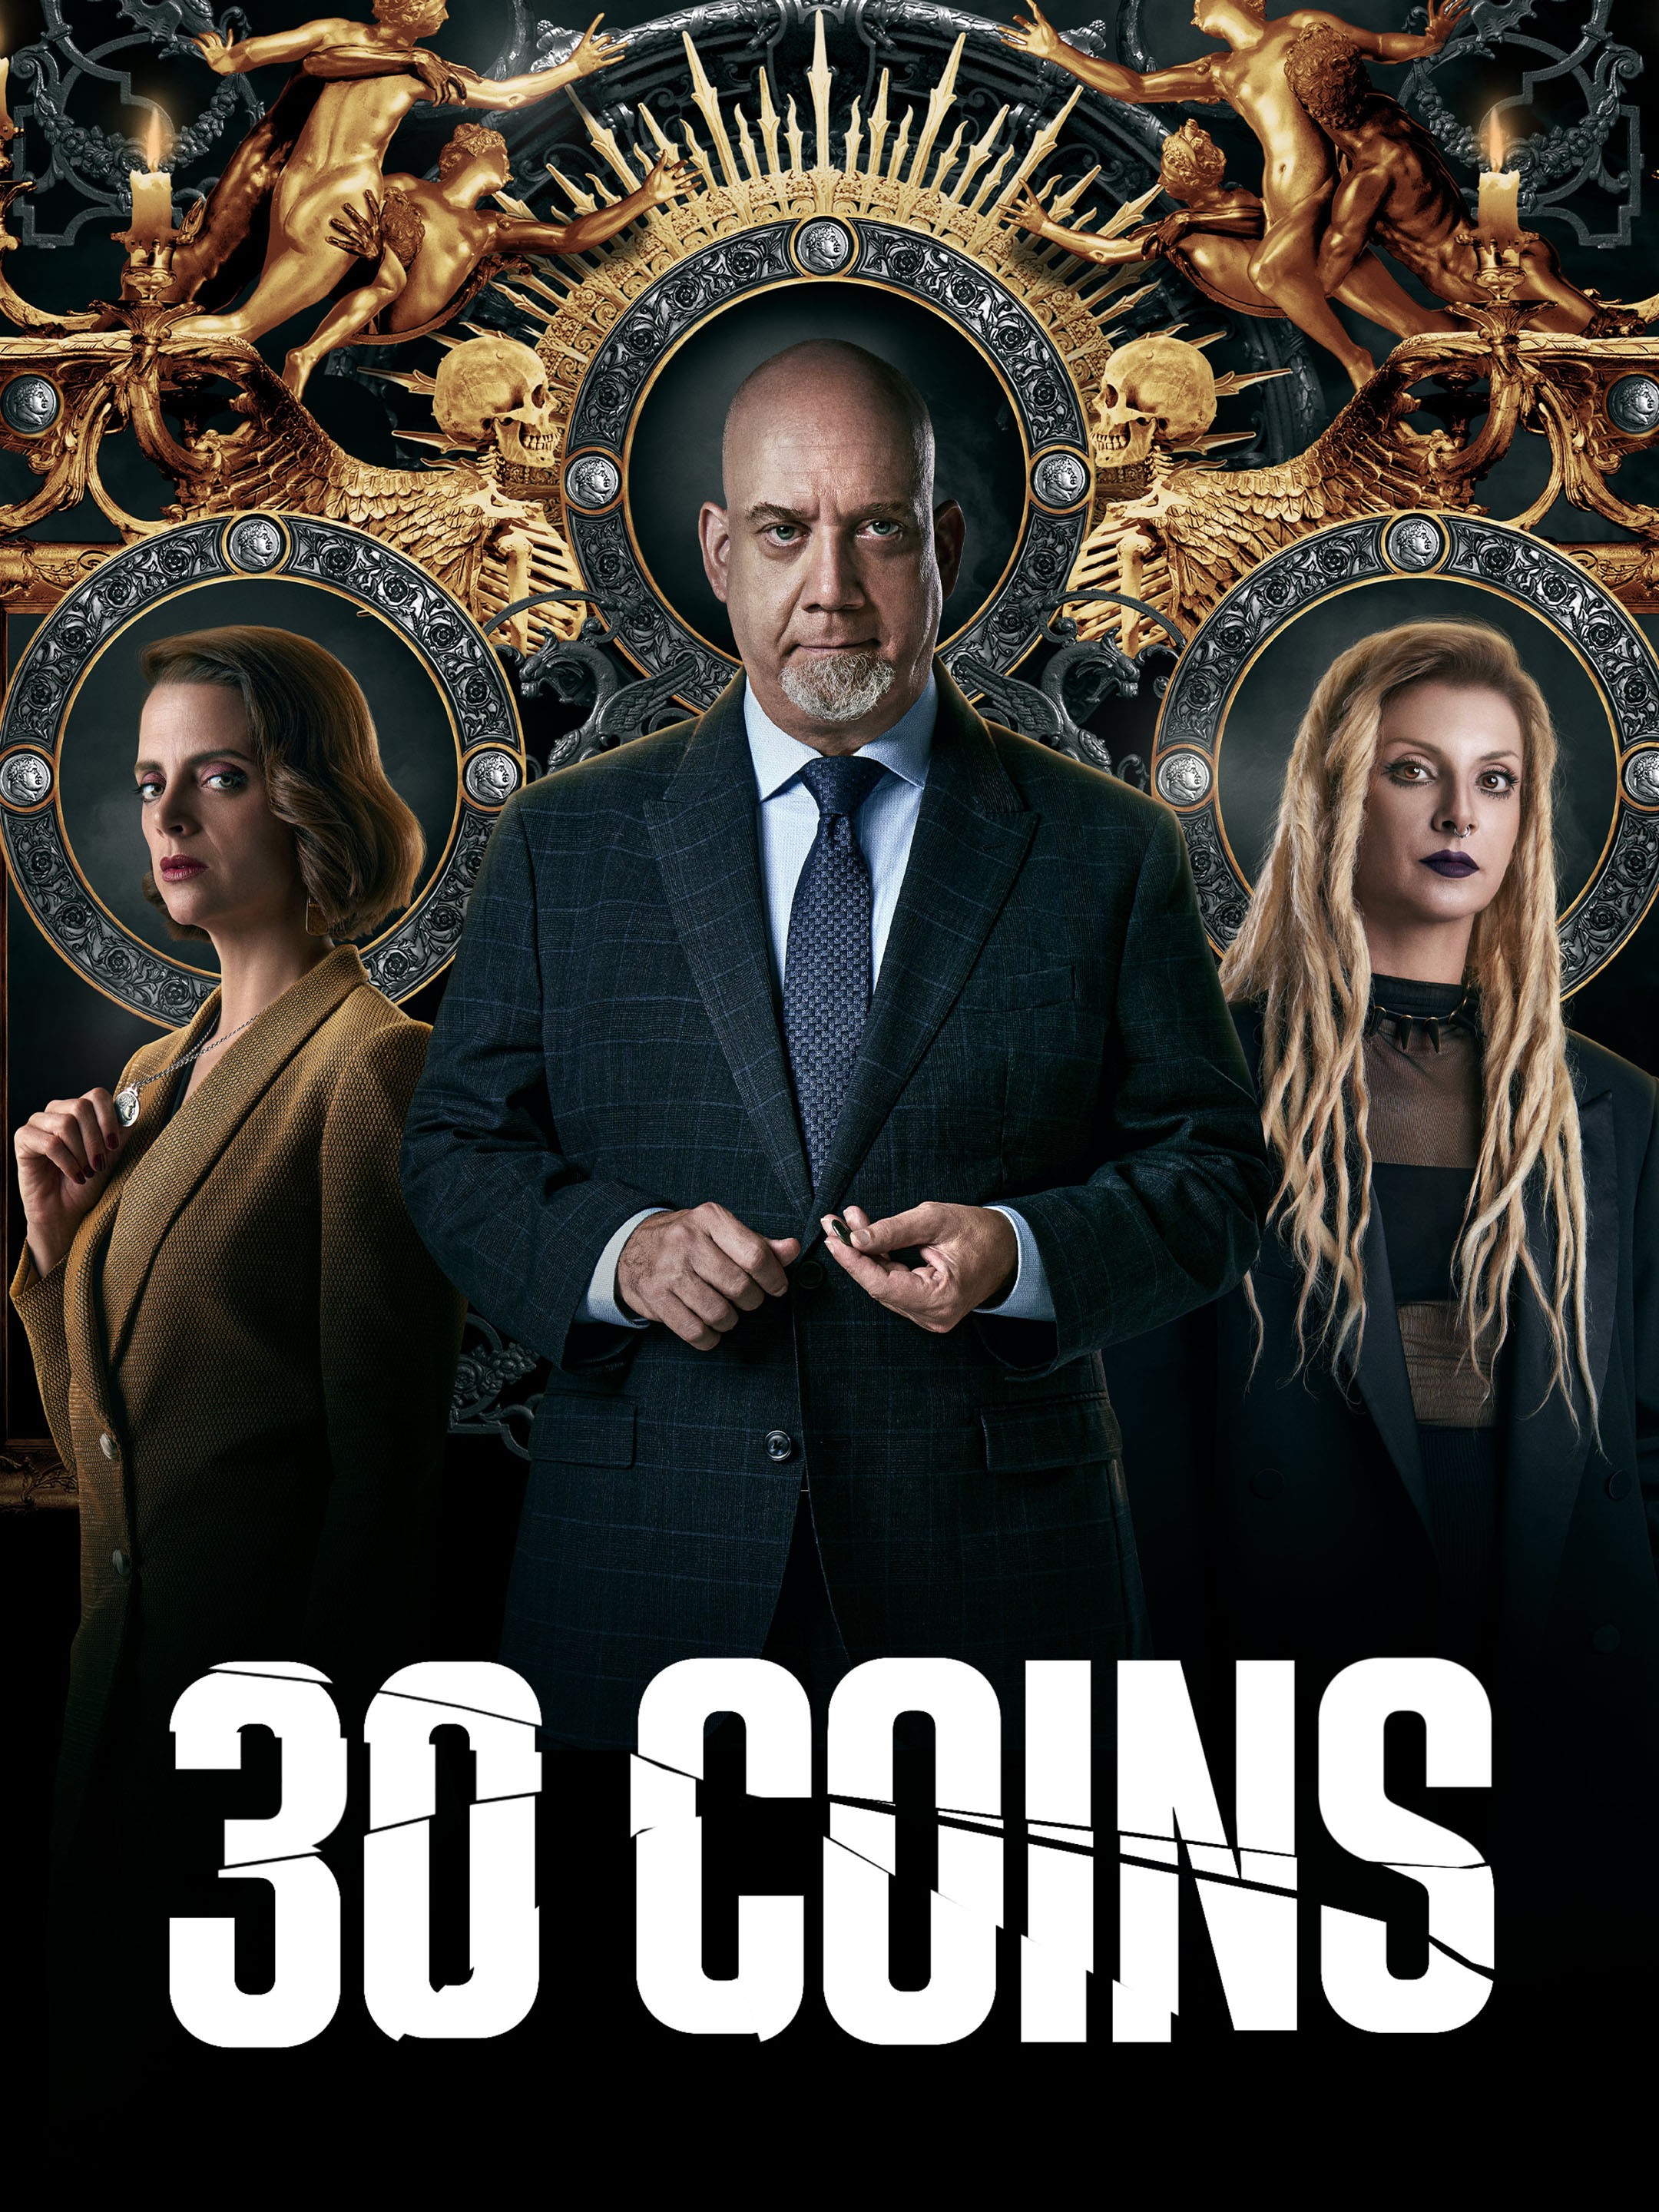 30 Coins review: HBO's masterful horror show reimagines the genre